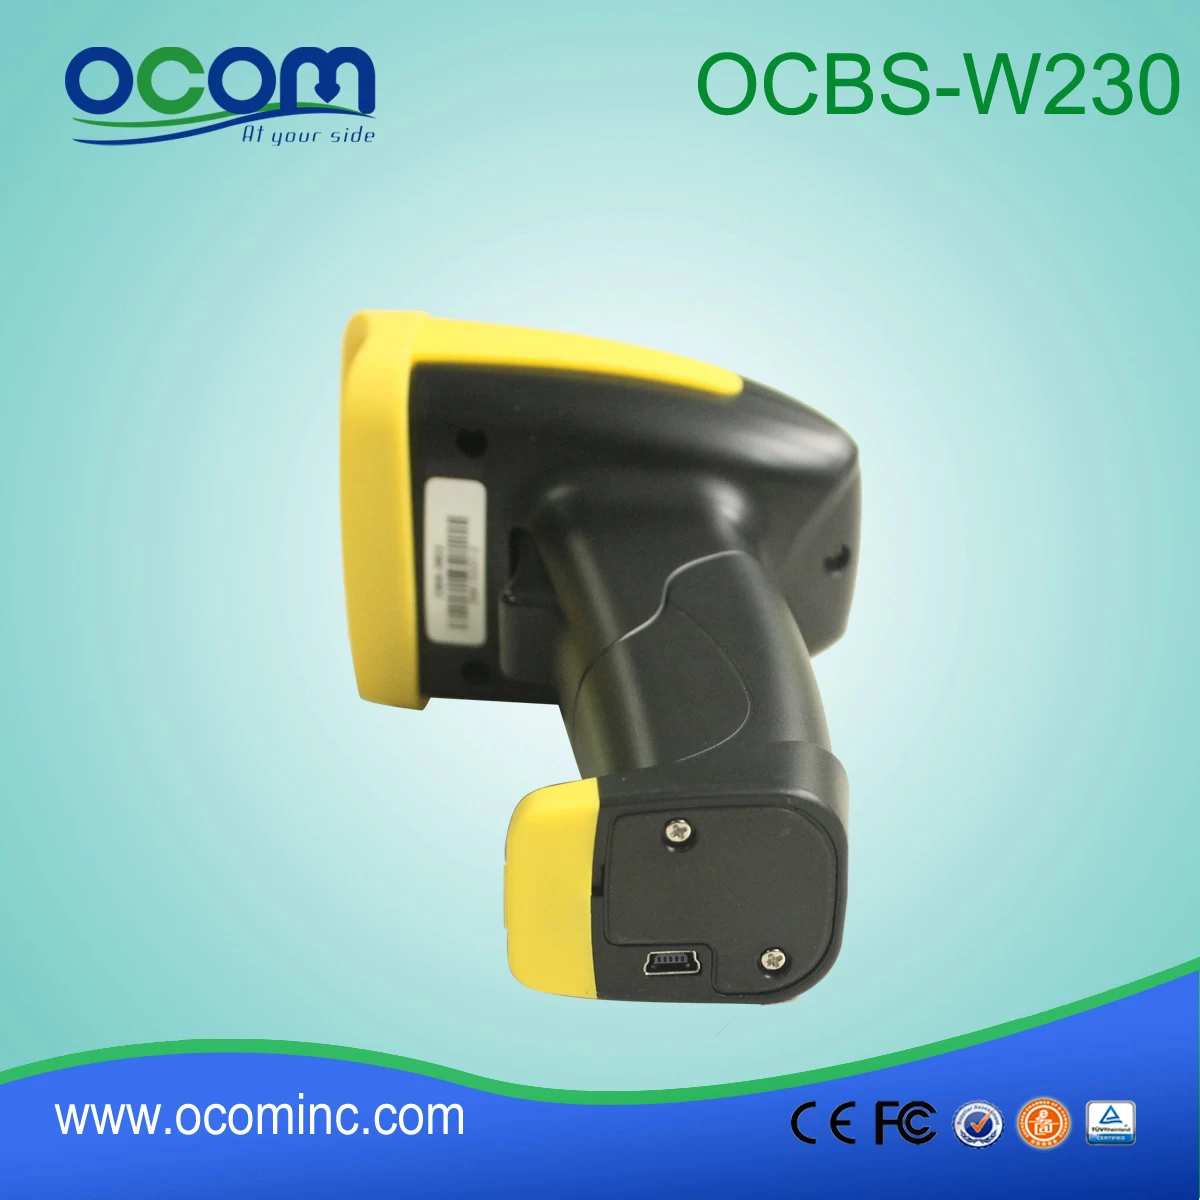 Plug and Play Wireless Bar code Reader for 2D and 1D Barcodes